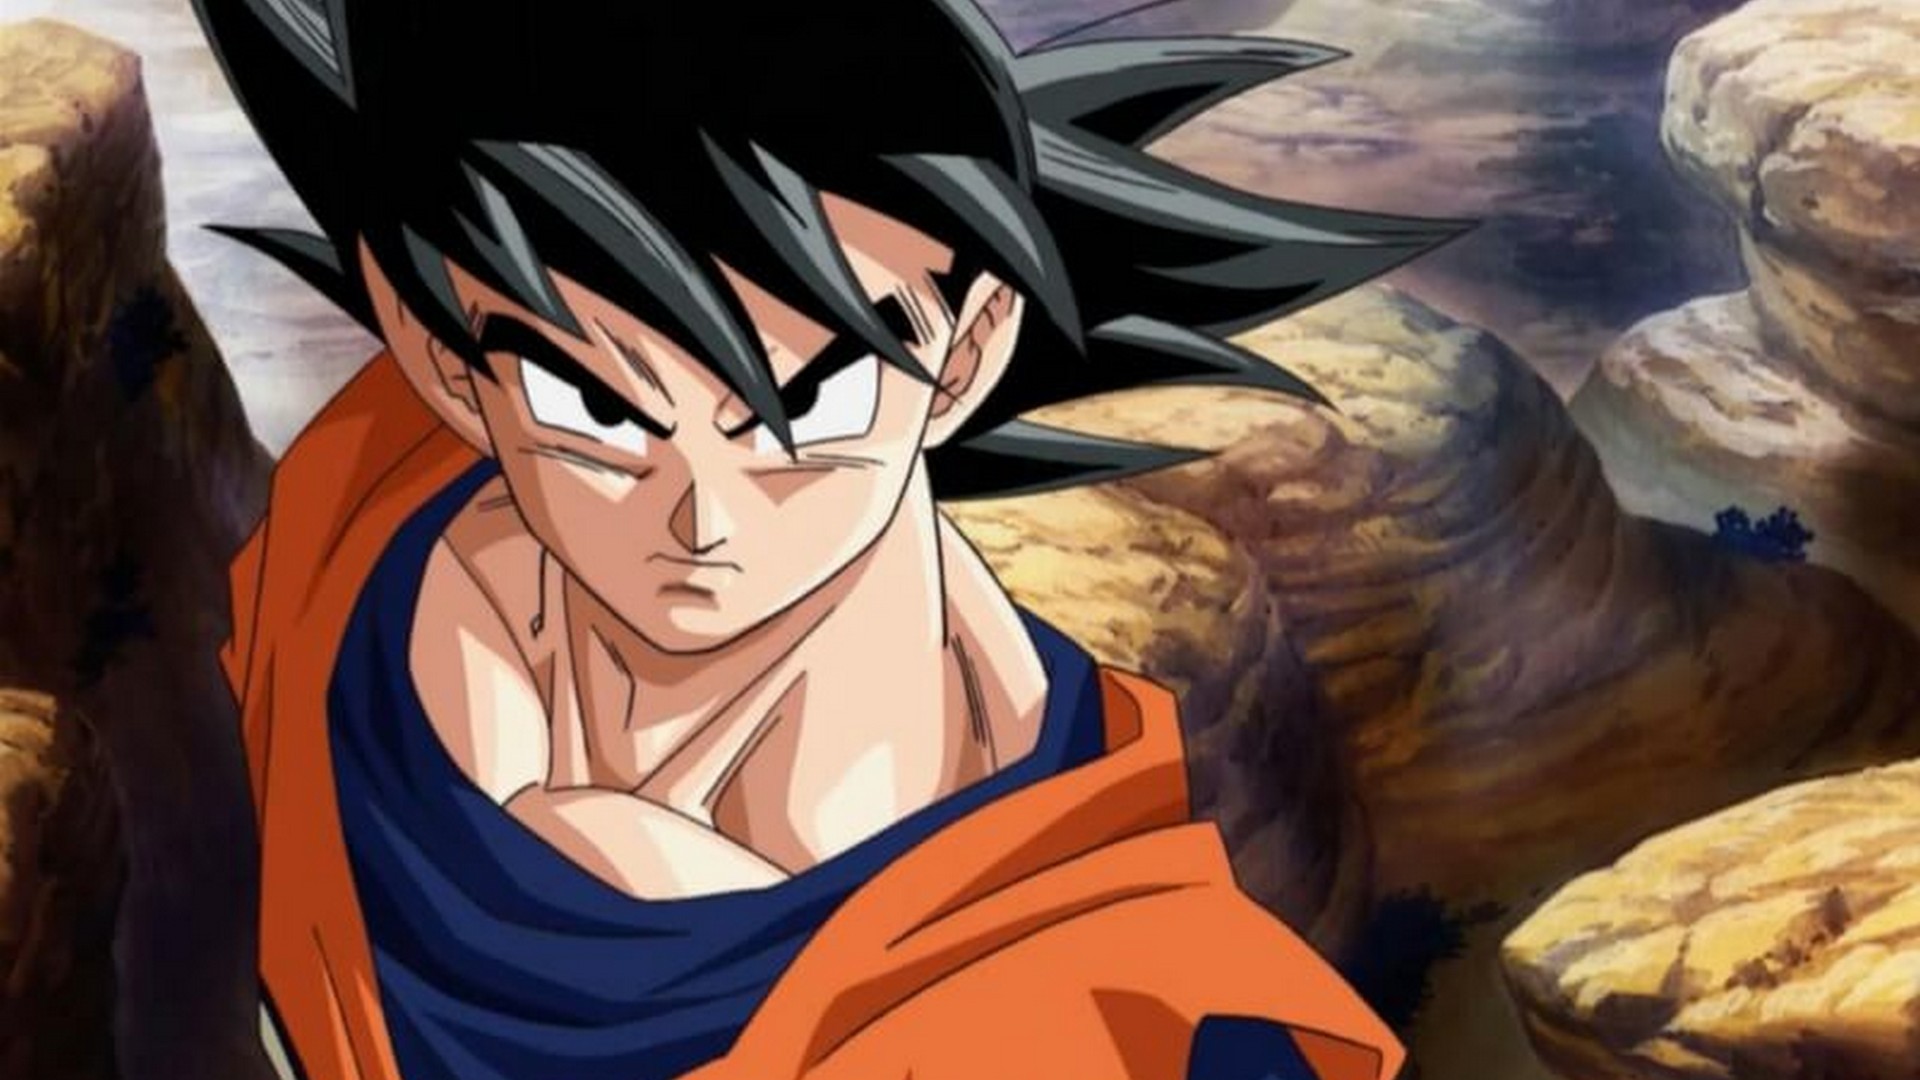 Wallpaper HD Goku Imagenes With Resolution 1920X1080 pixel. You can make this wallpaper for your Desktop Computer Backgrounds, Mac Wallpapers, Android Lock screen or iPhone Screensavers